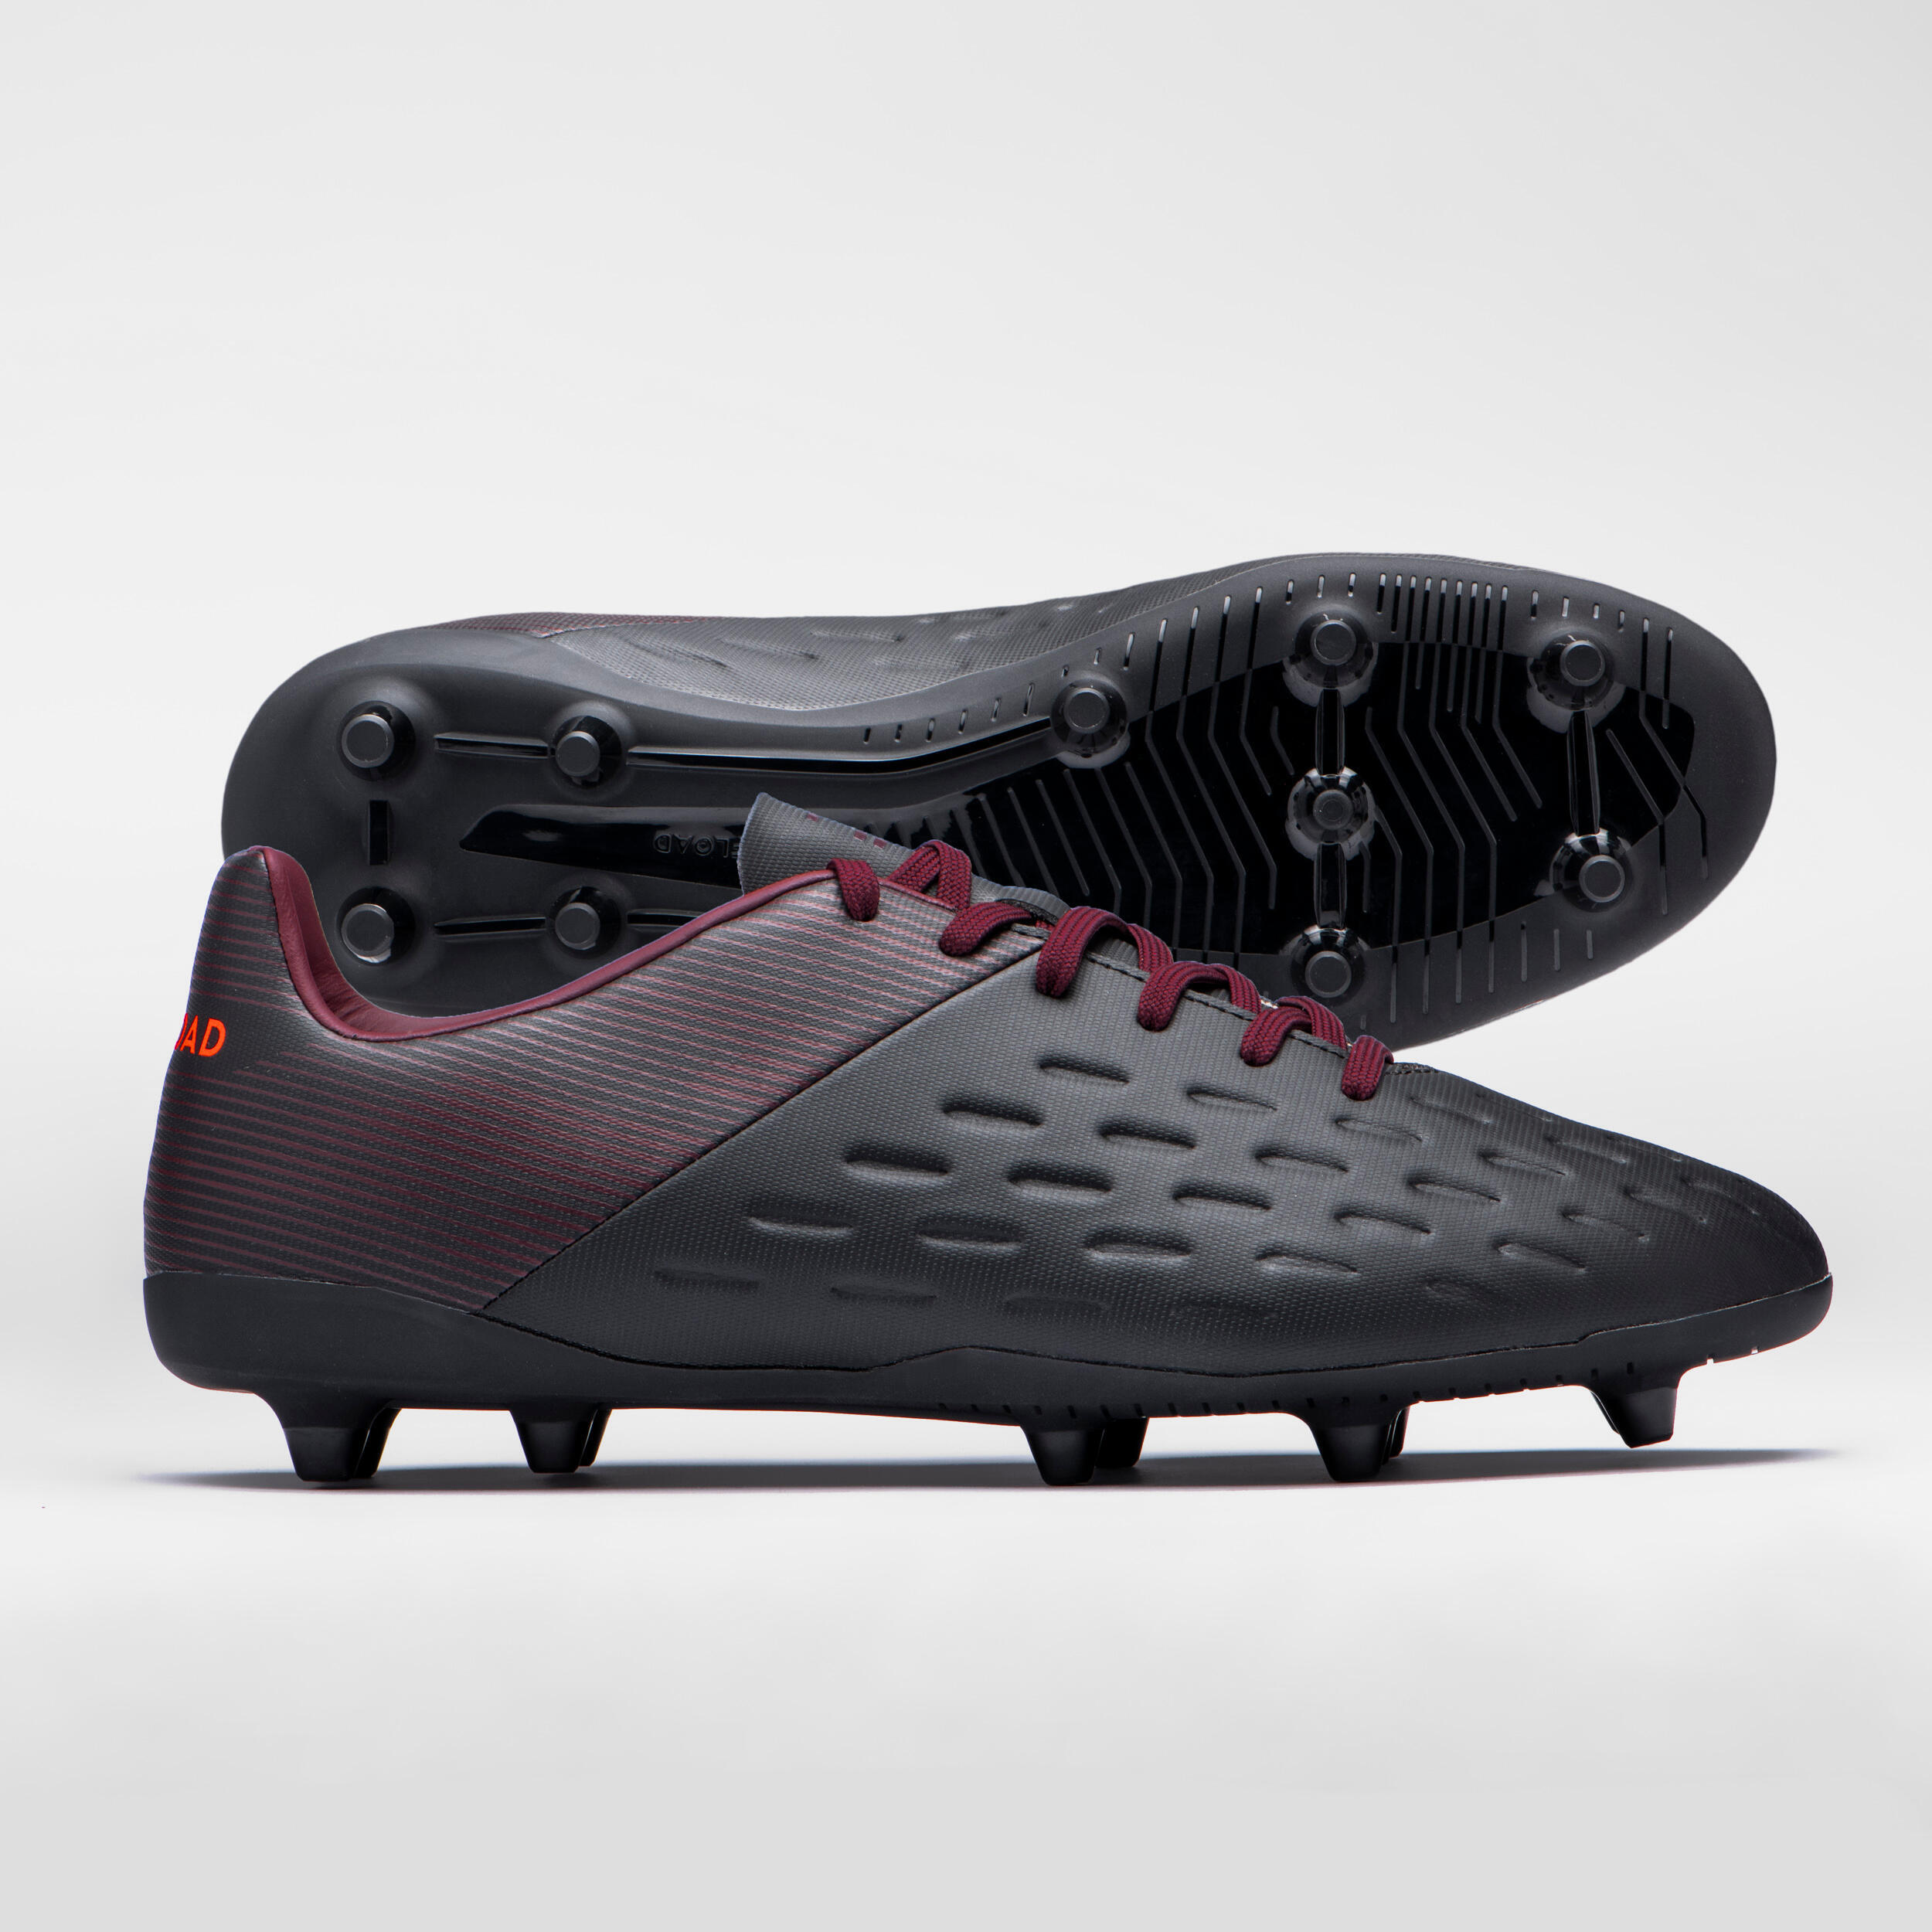 Men's Moulded Dry Pitch Rugby Boots Advance R100 FG - Black/Burgundy 3/9